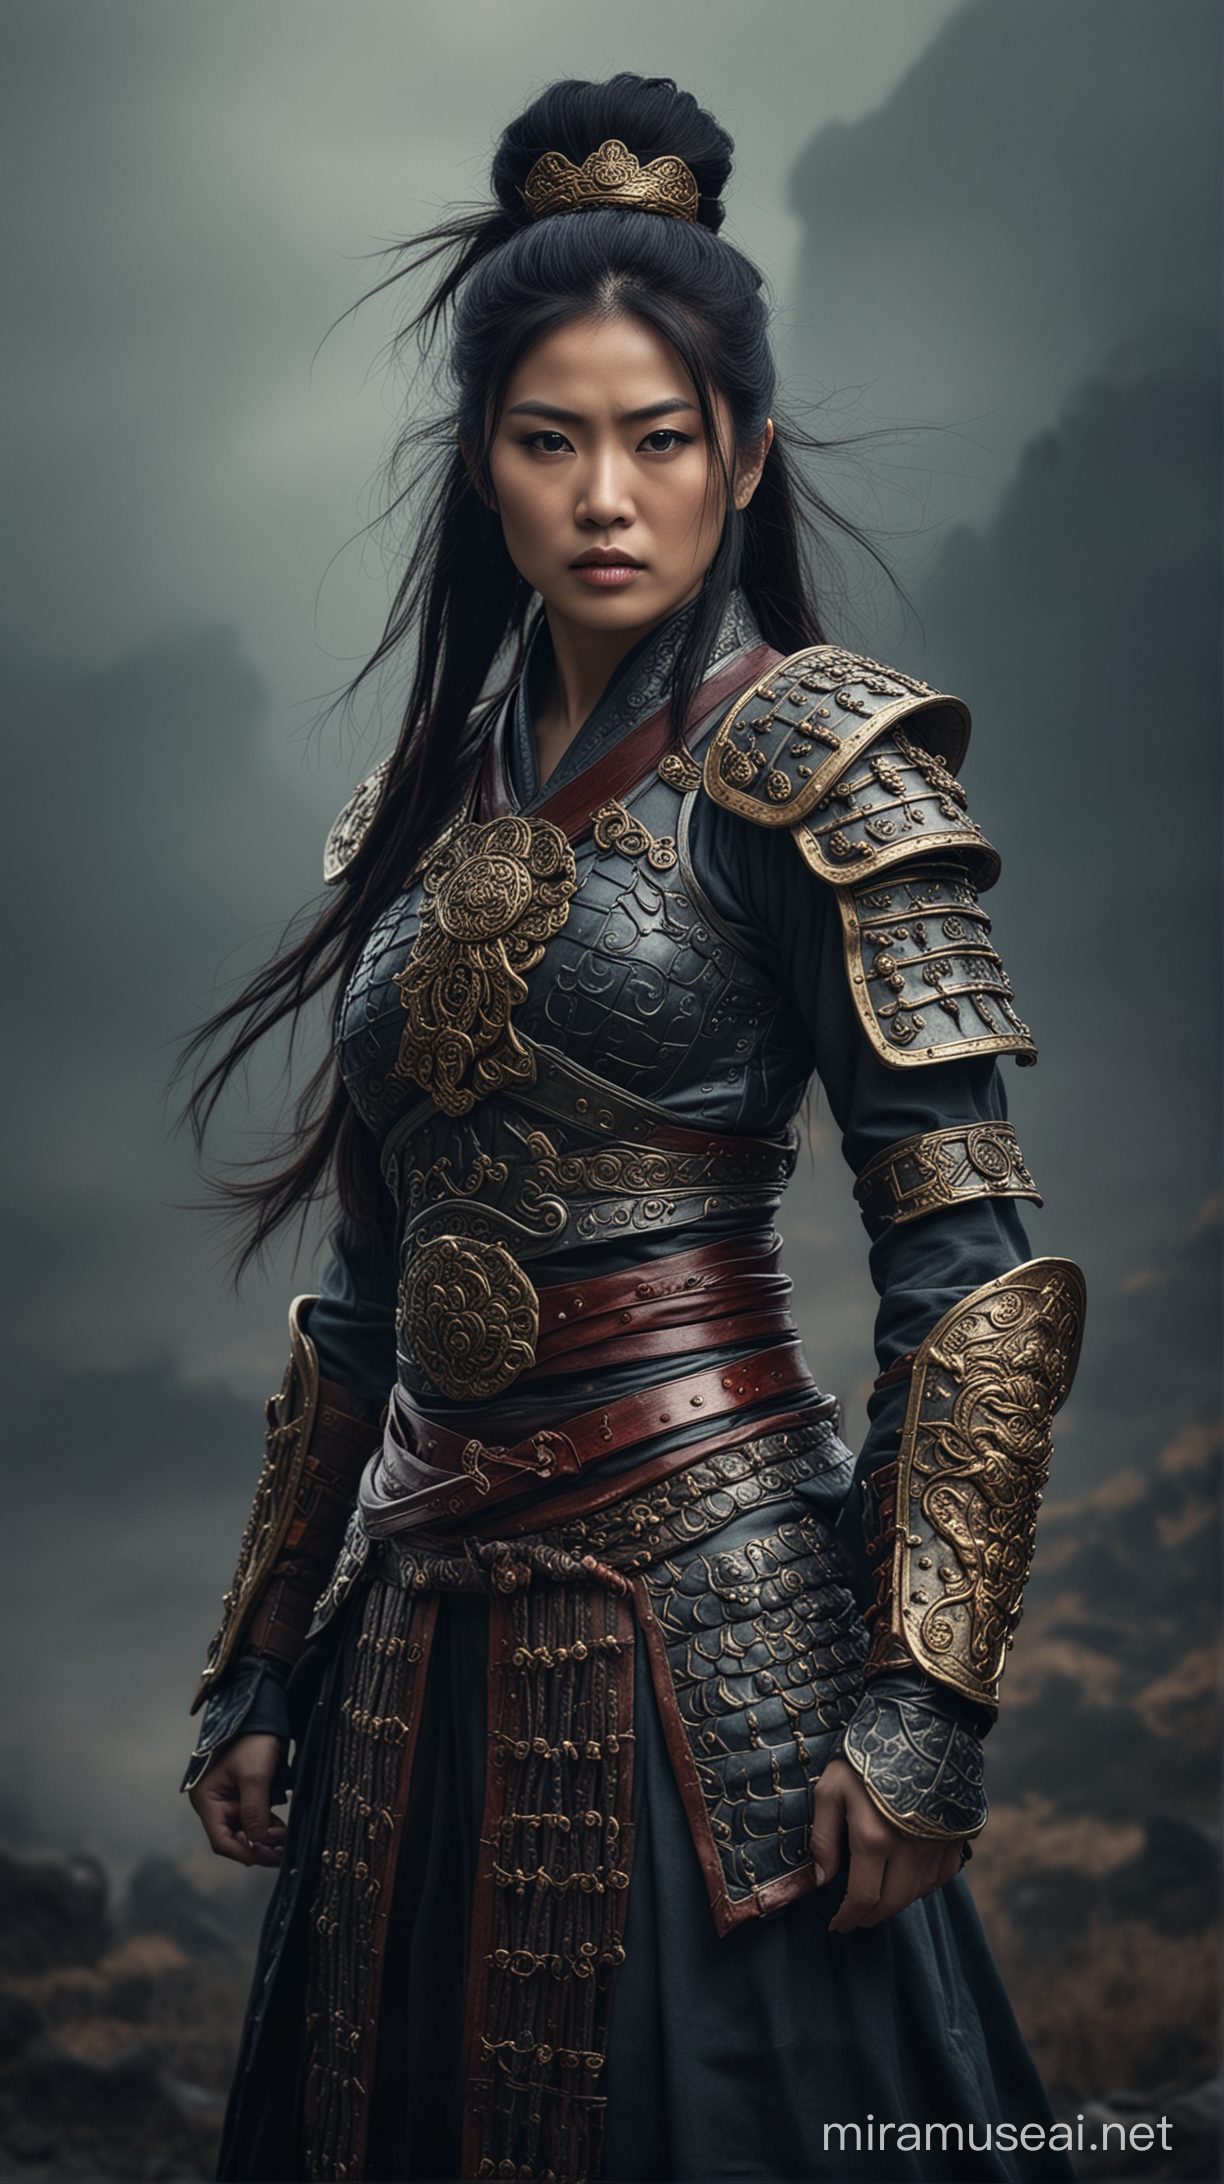 A (((beautiful woman))) from the China Jinn Dynasty dressed in a (((warrior attire))), standing ominously against a (moody backdrop that incorporates elements of nature)